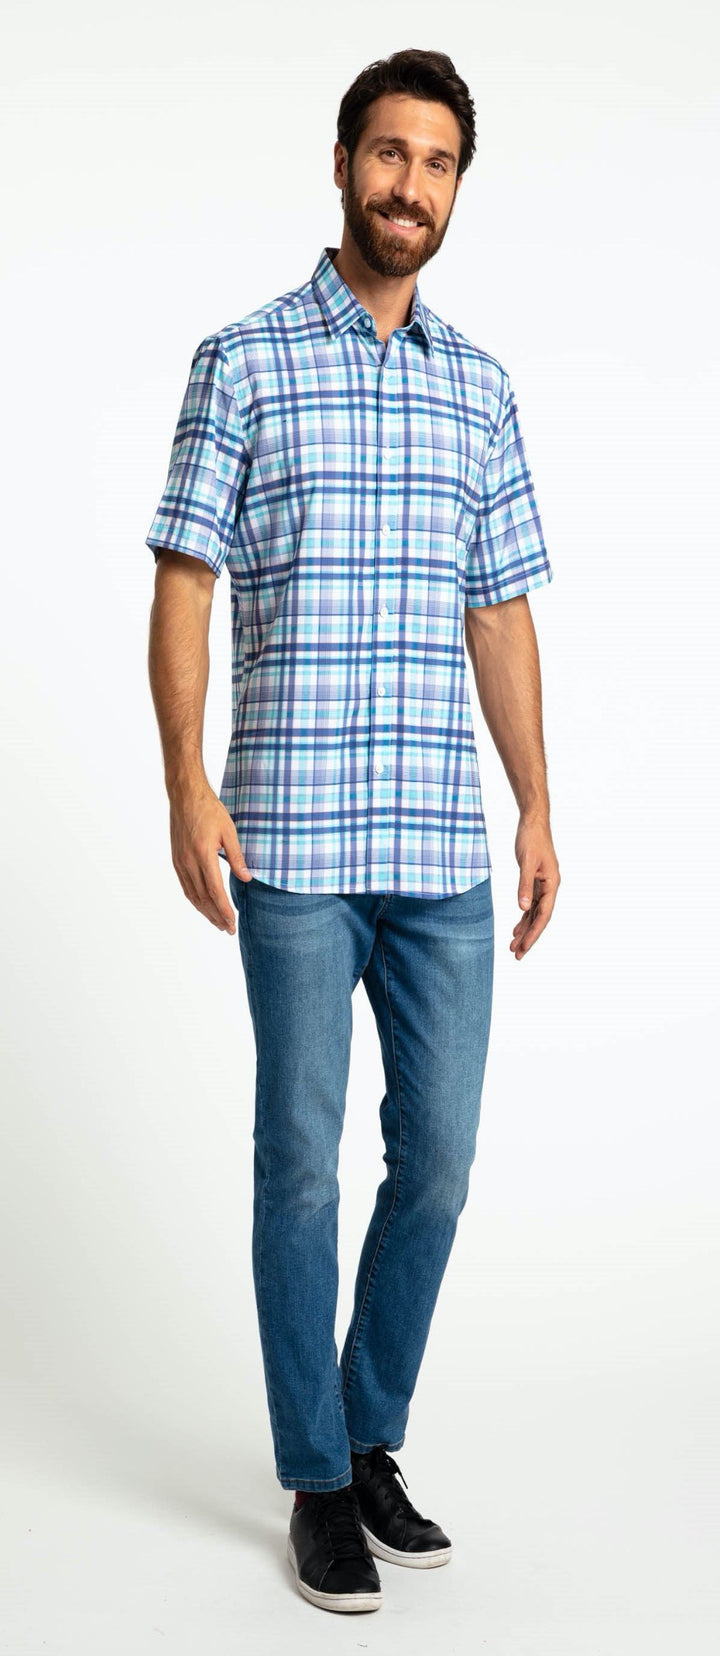 Save the Ocean Recycled blue plaid short sleeve shirt